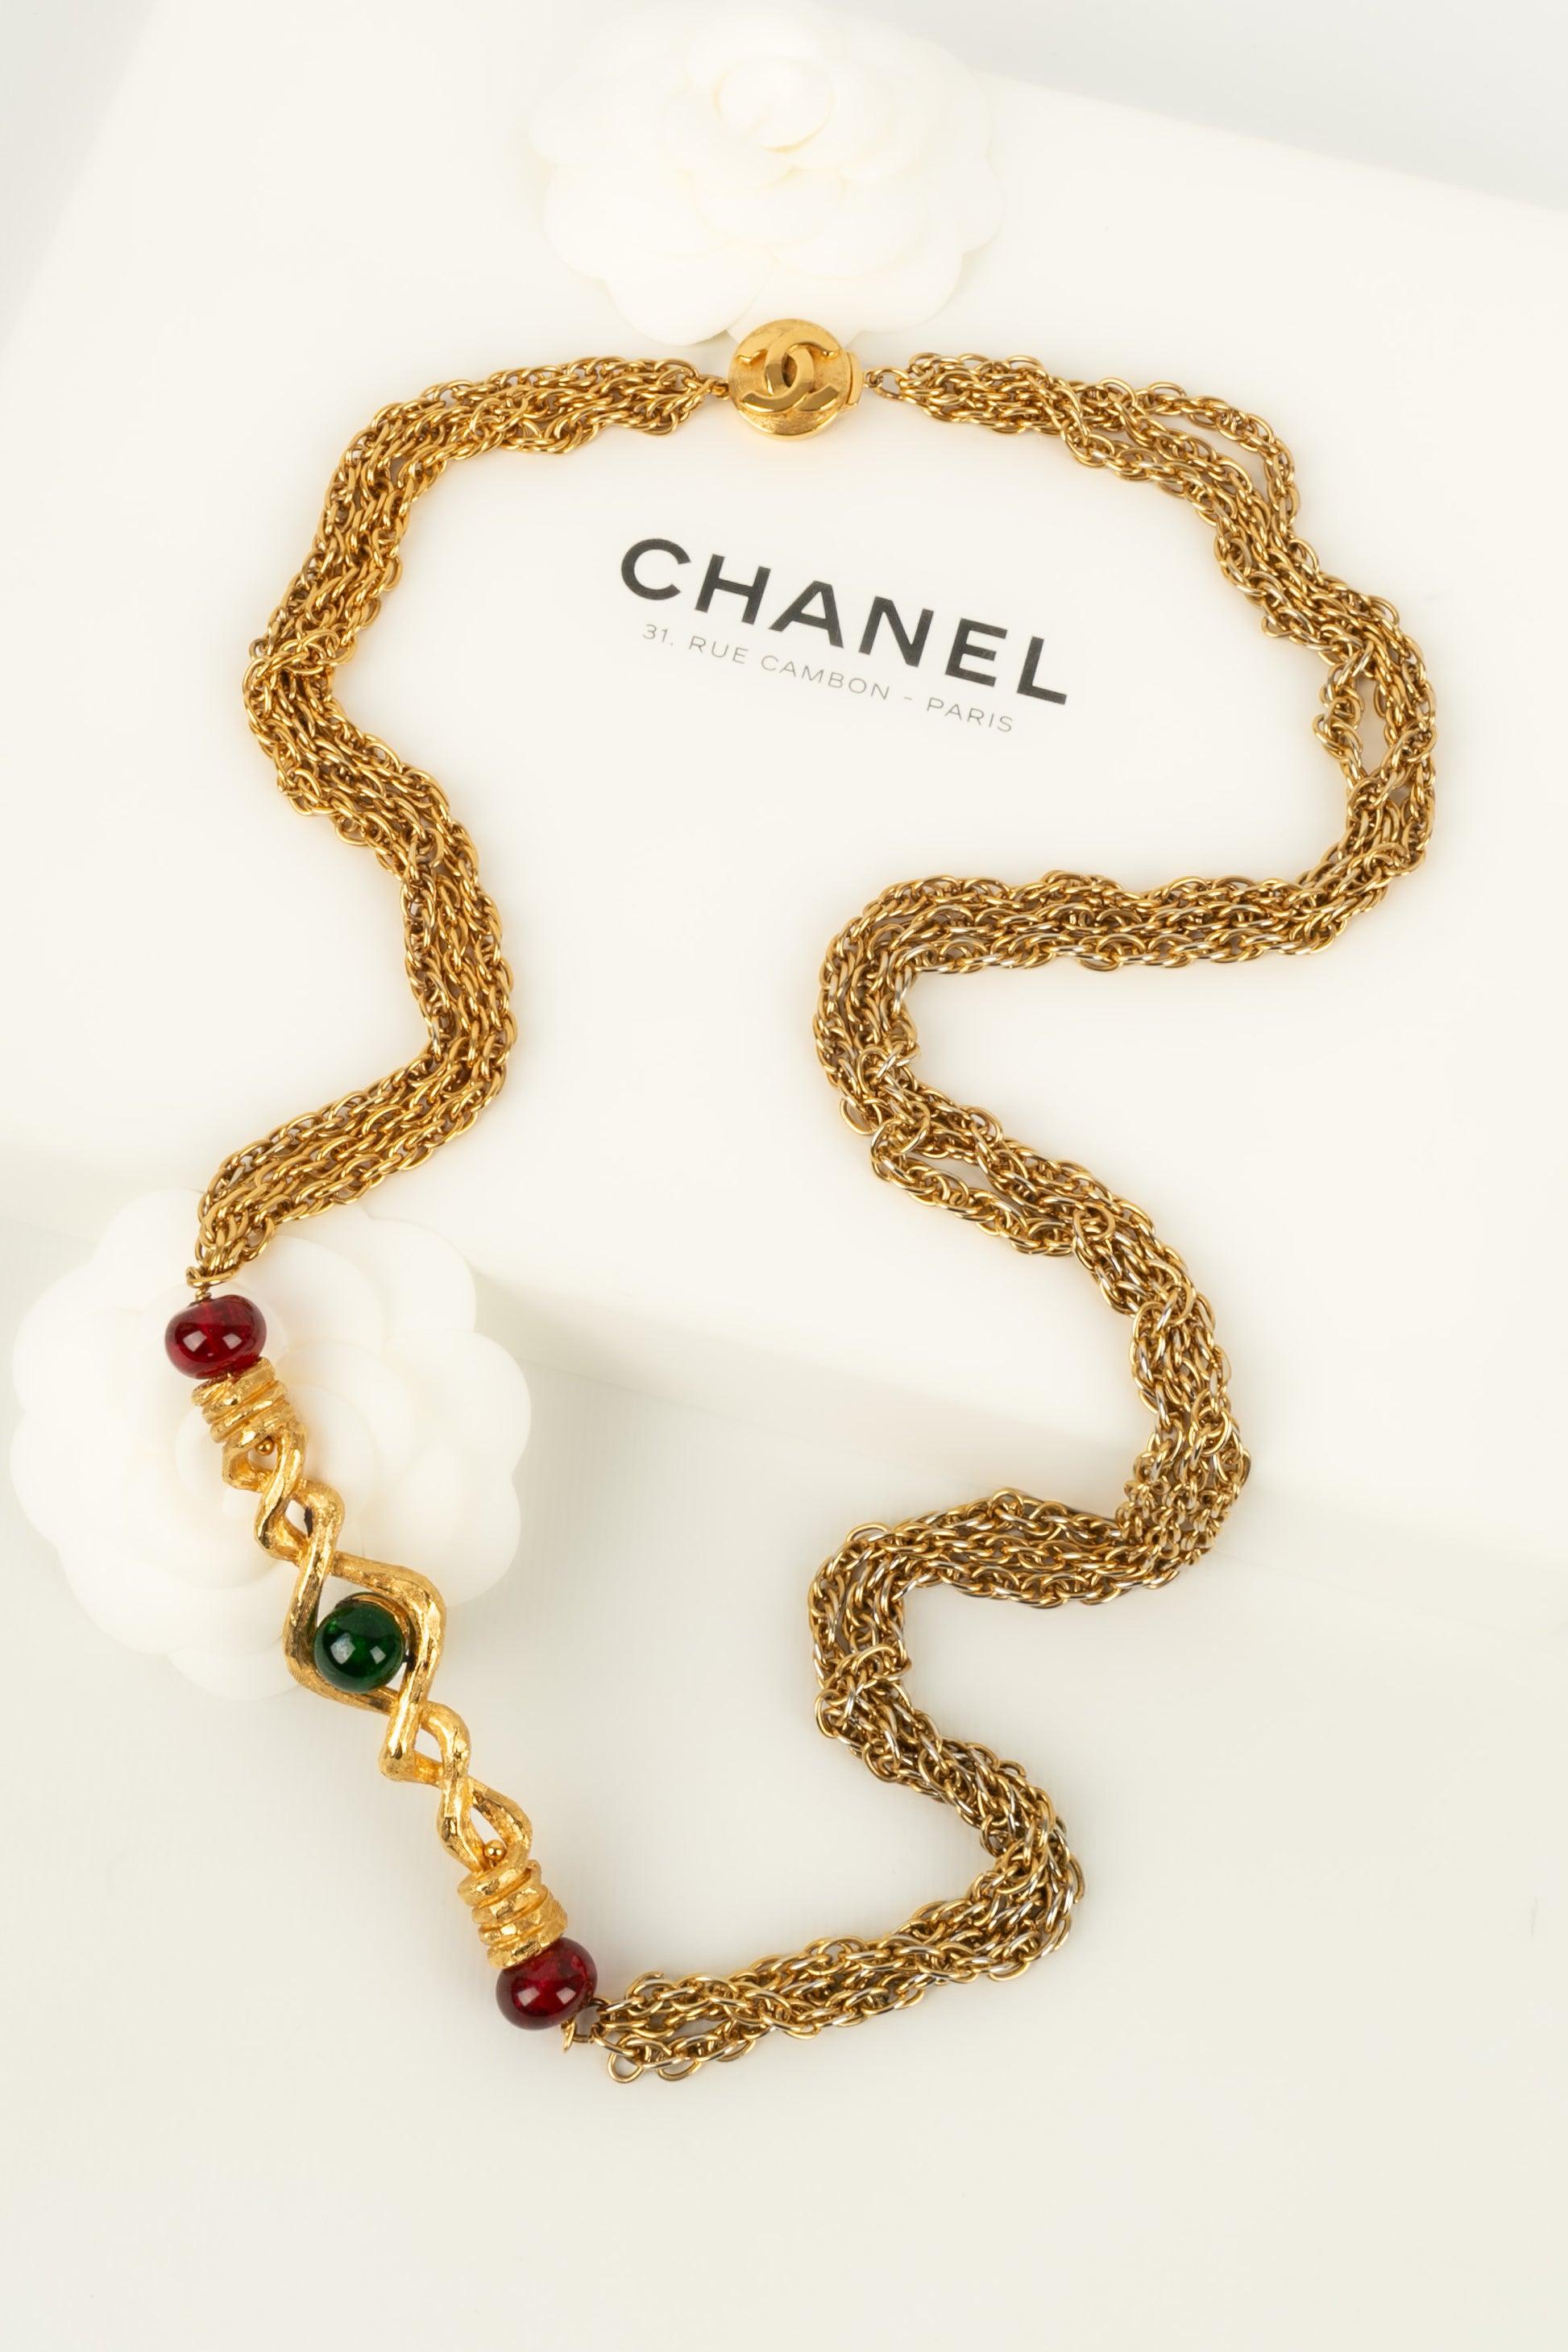 Chanel Necklace in Gold-Plated Metal and Colored Glass Pearls For Sale 7